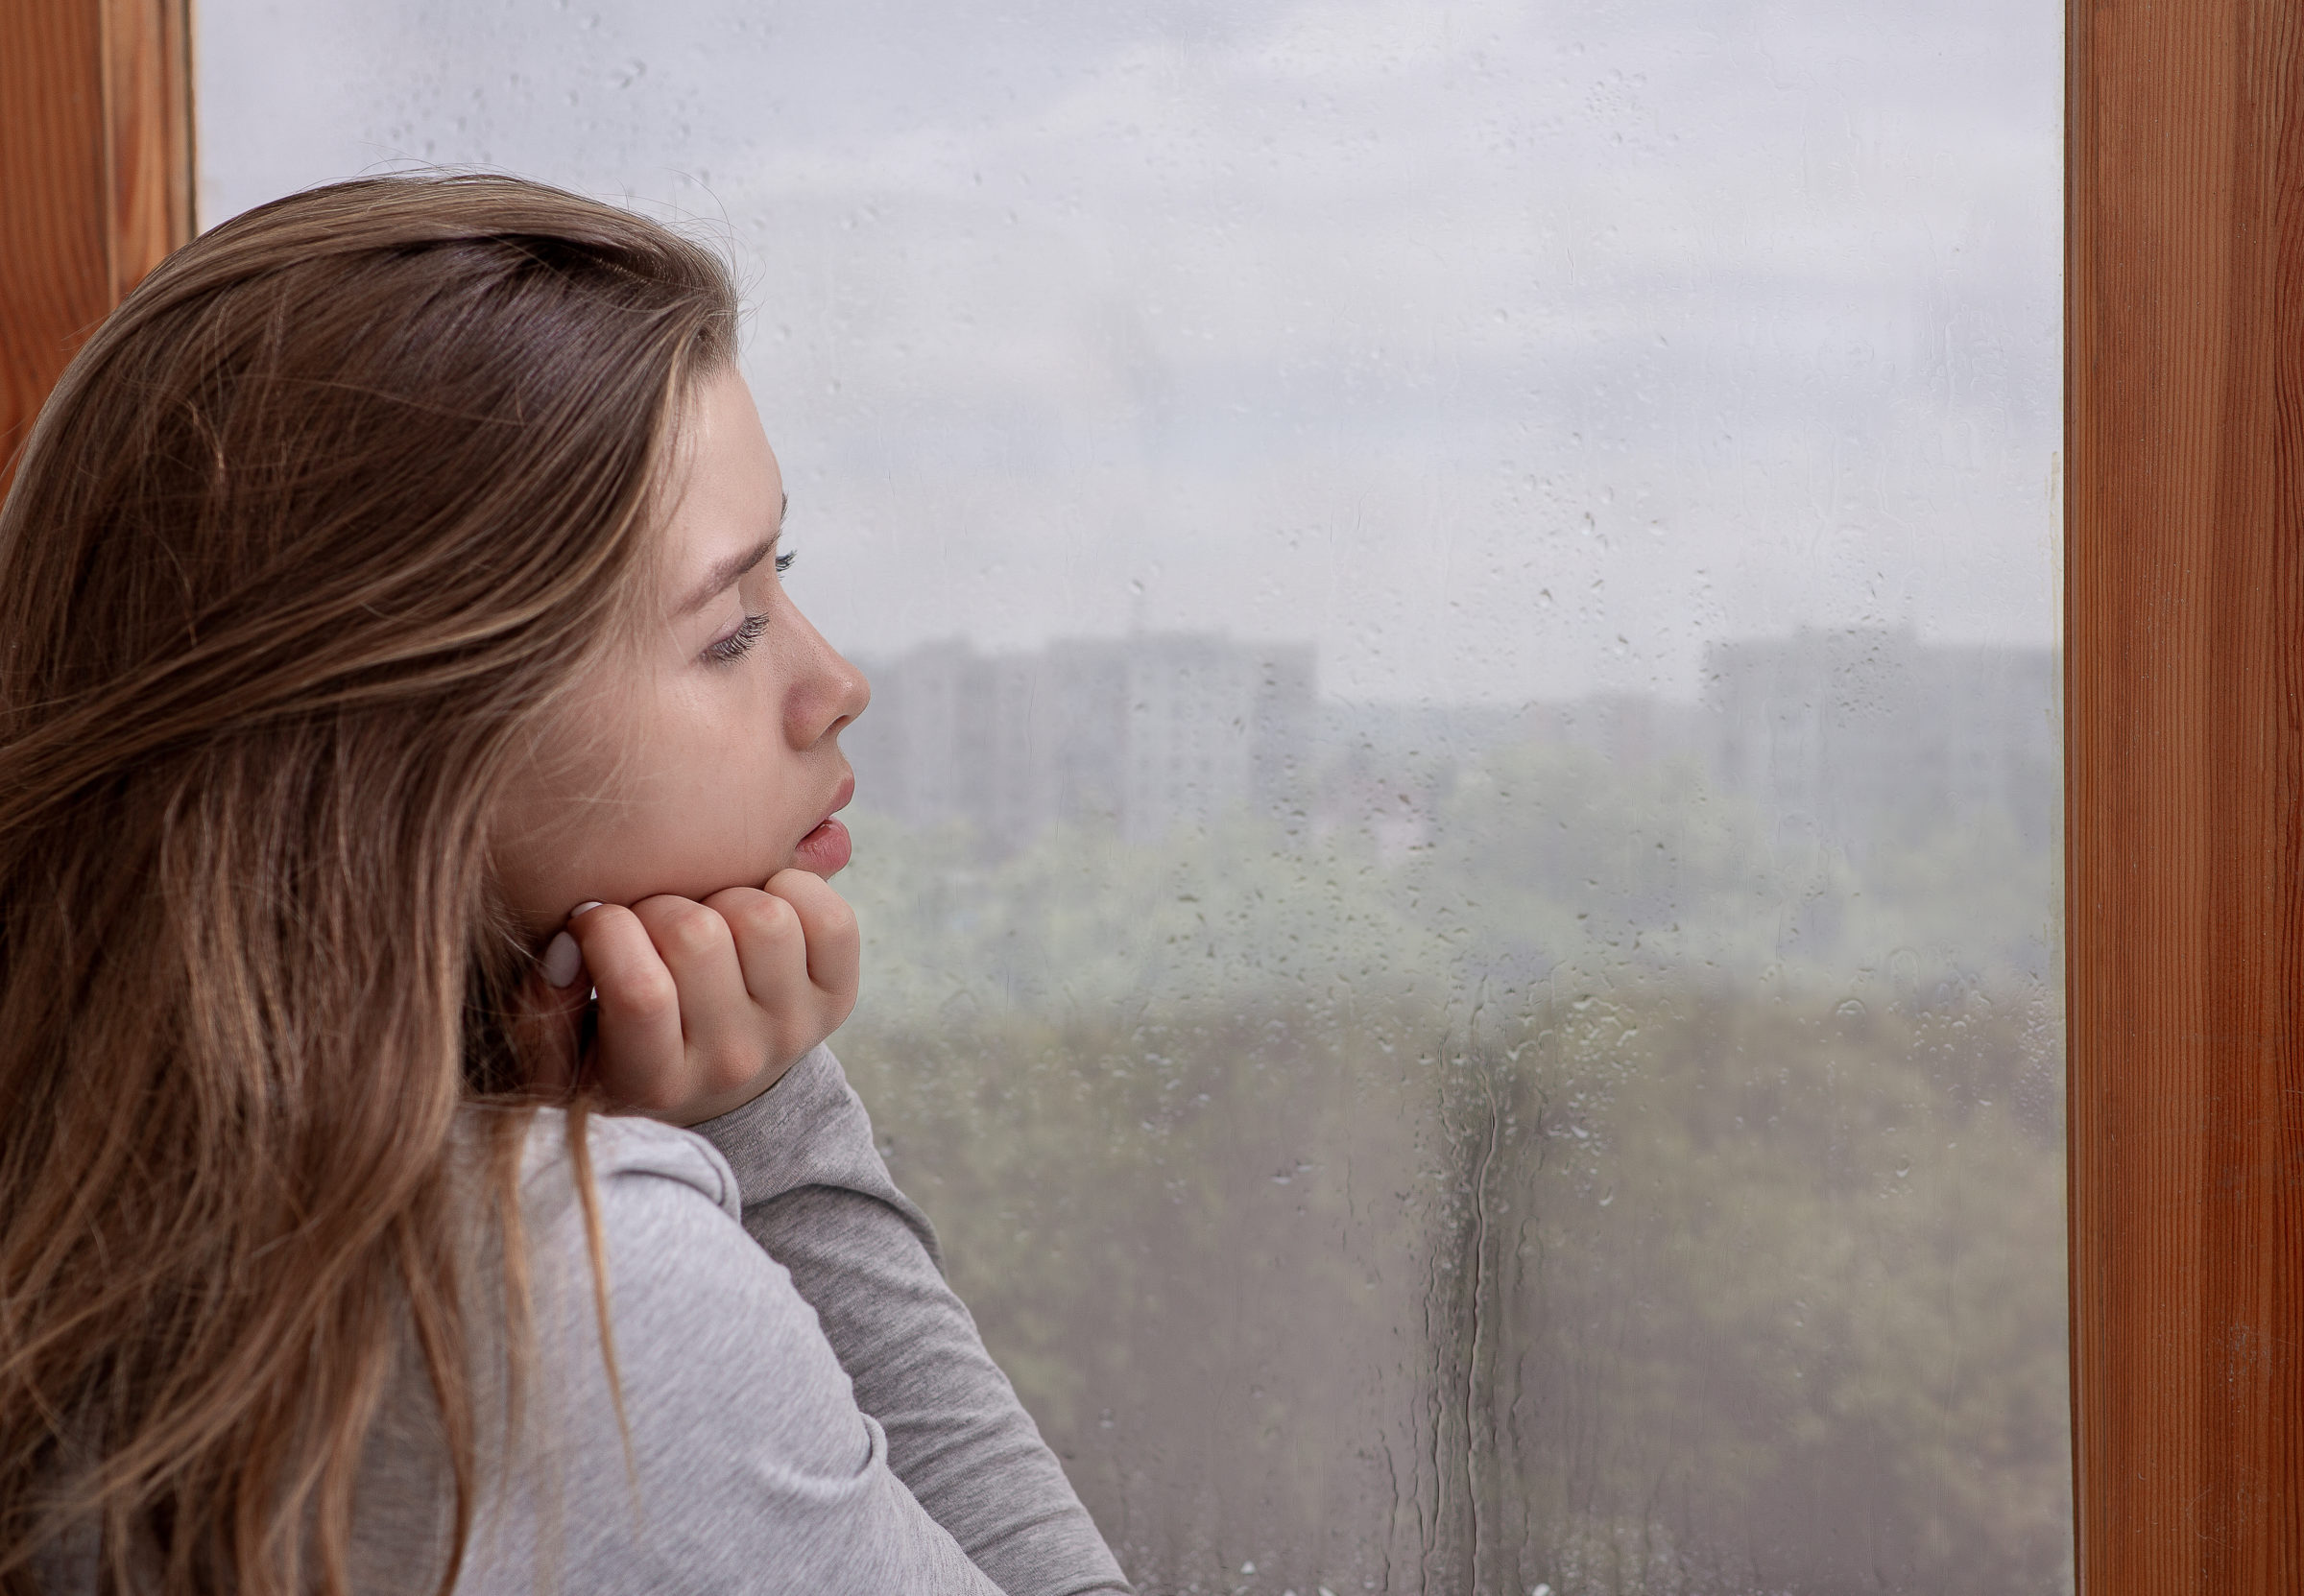 sad young woman looking out window lost in thought DWFZ334